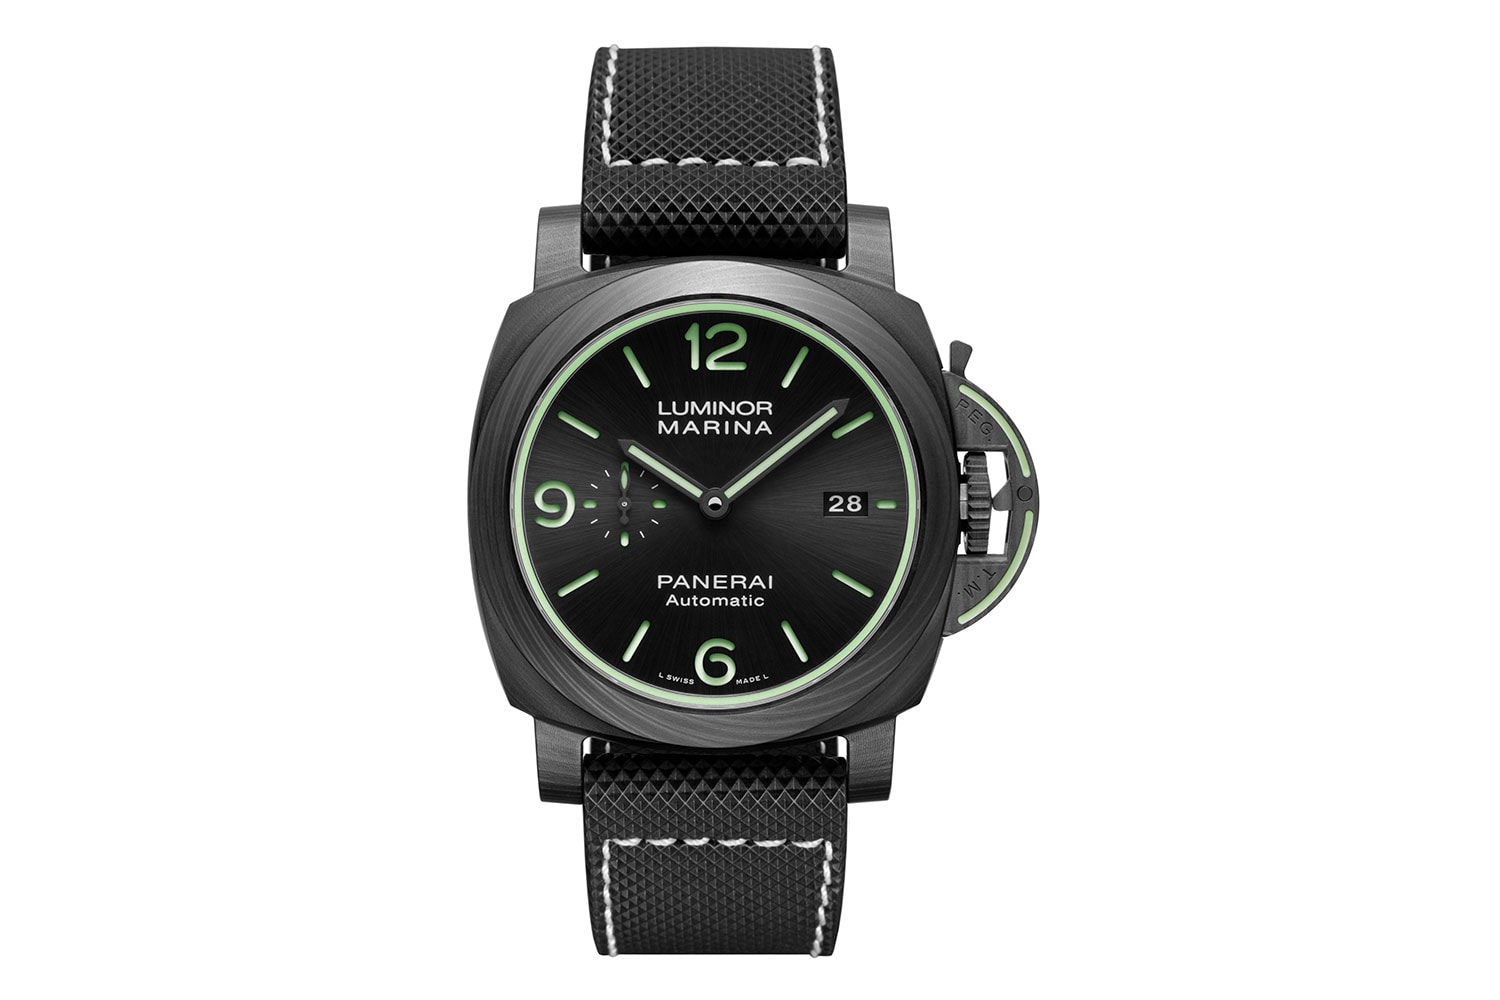 Panerai Release Stealthy Carbotech Luminor Marina Watch 70th anniversary Italian Navy Dive Watch Carbon Fiber PAM PAM1118 Watches Swiss made Dive Watches wrist watches 